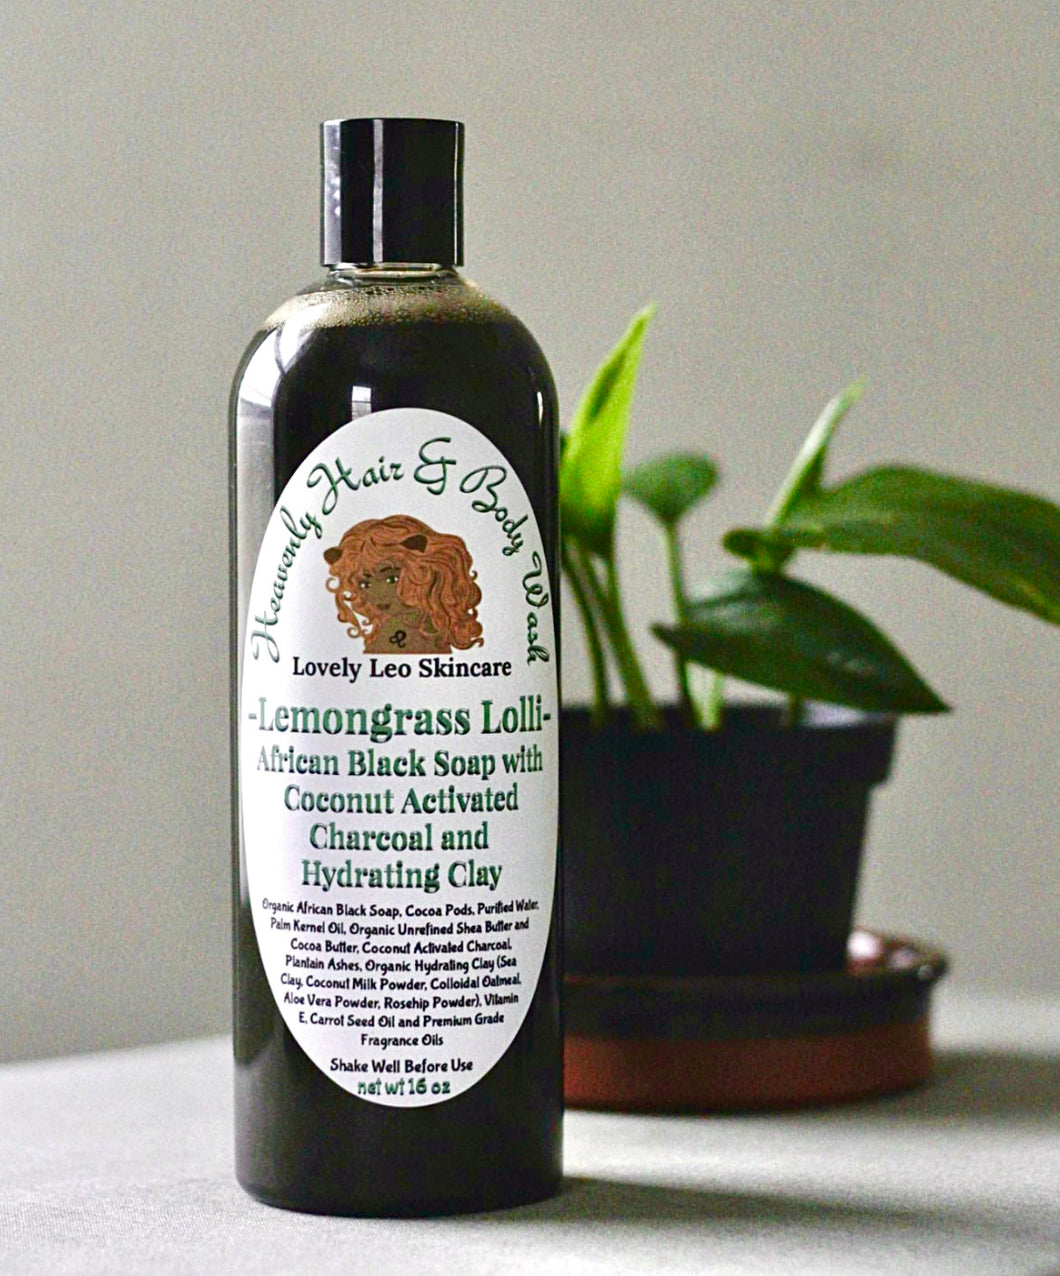 Heavenly African Black Soap Hair, Face & Body Wash with Coconut Activated Charcoal and Hydration Clay